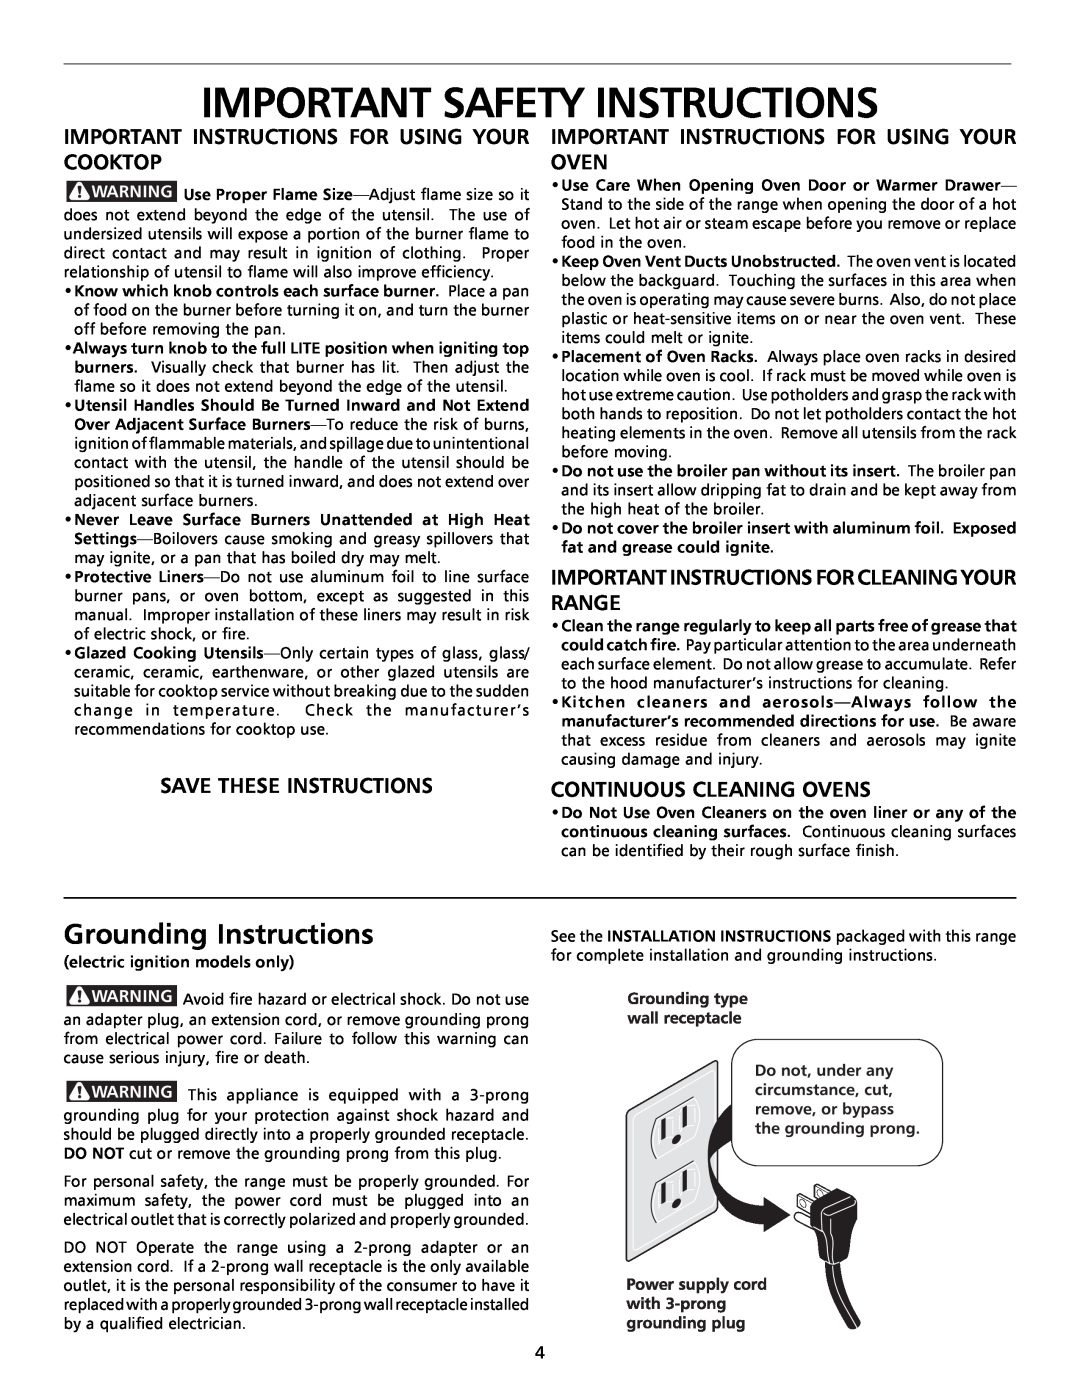 Frigidaire GAS RANG Grounding Instructions, Important Instructions For Using Your Cooktop, Save These Instructions 